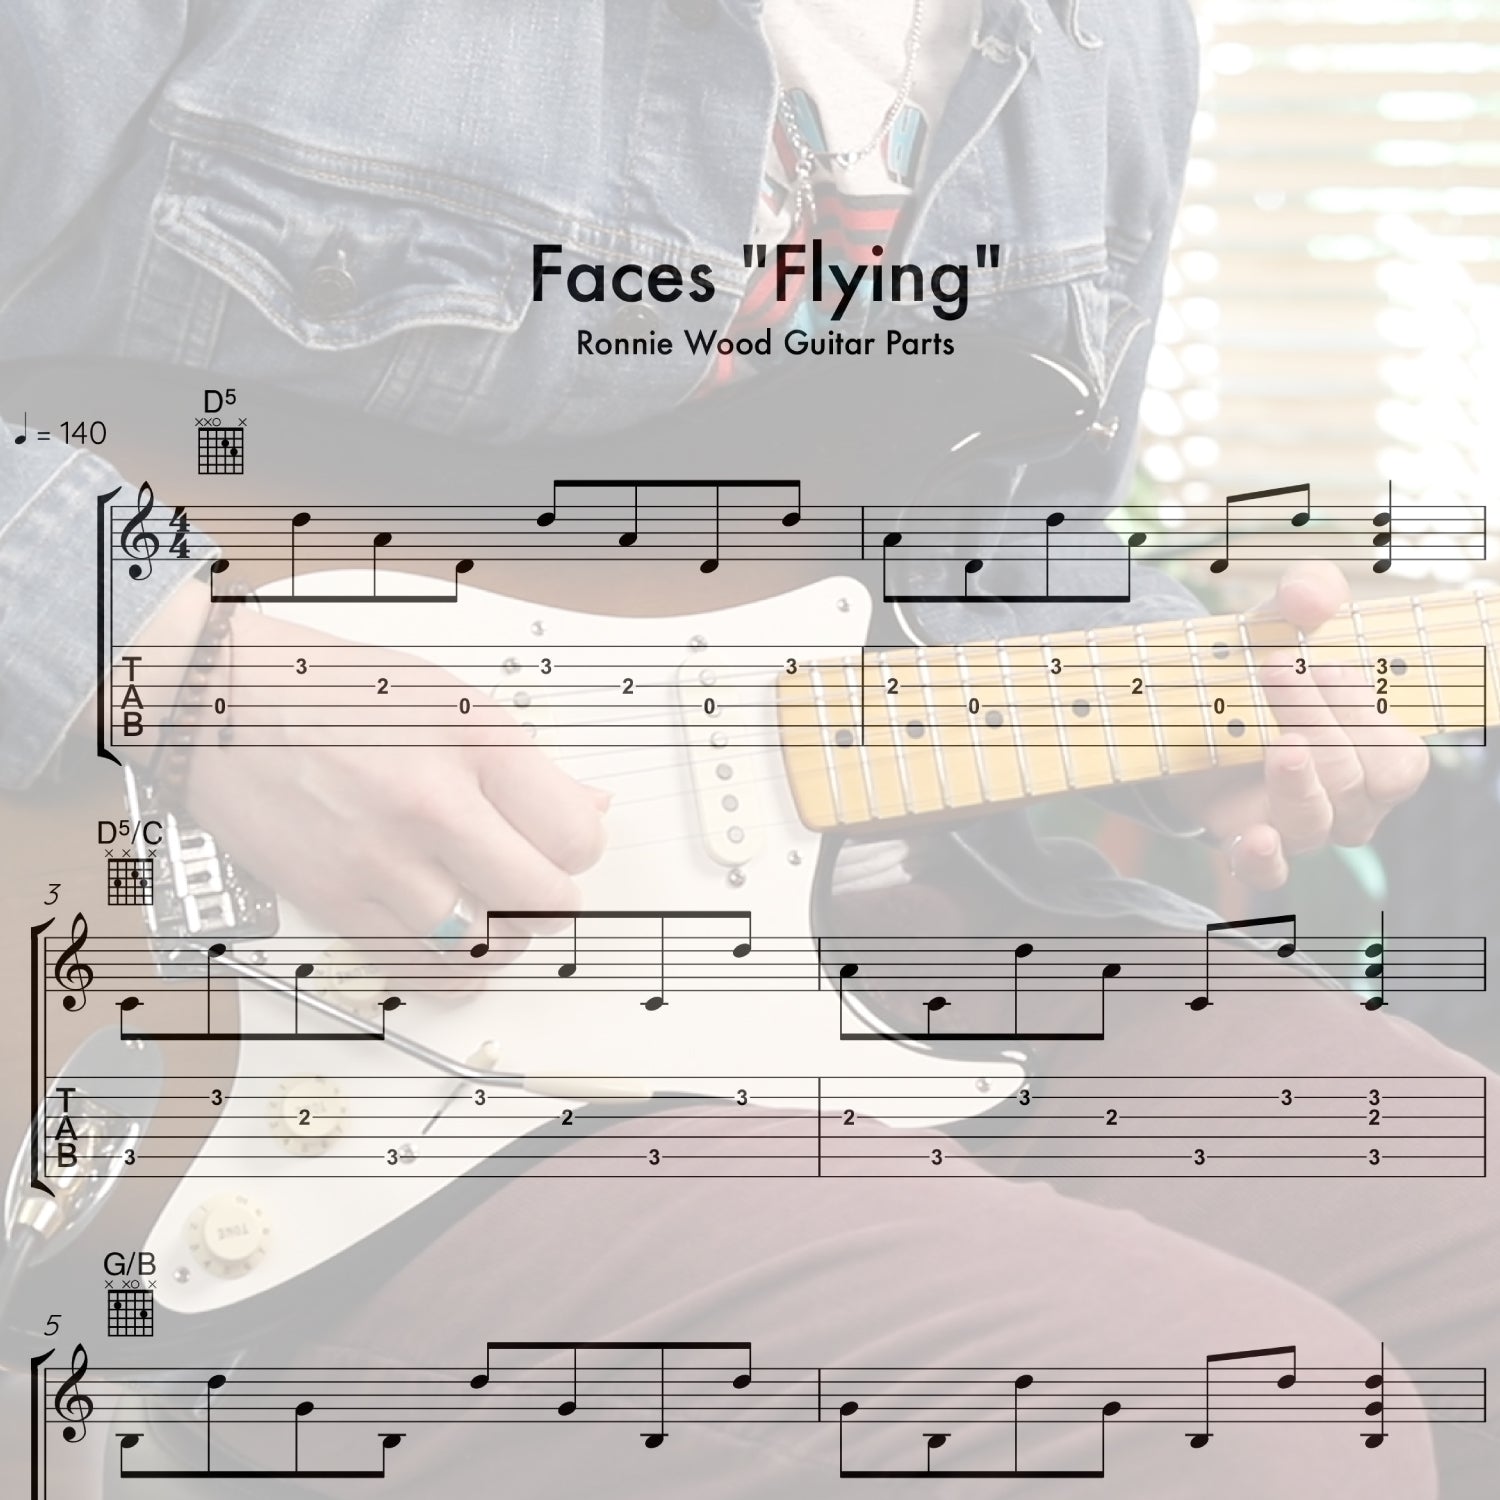 Faces "Flying"